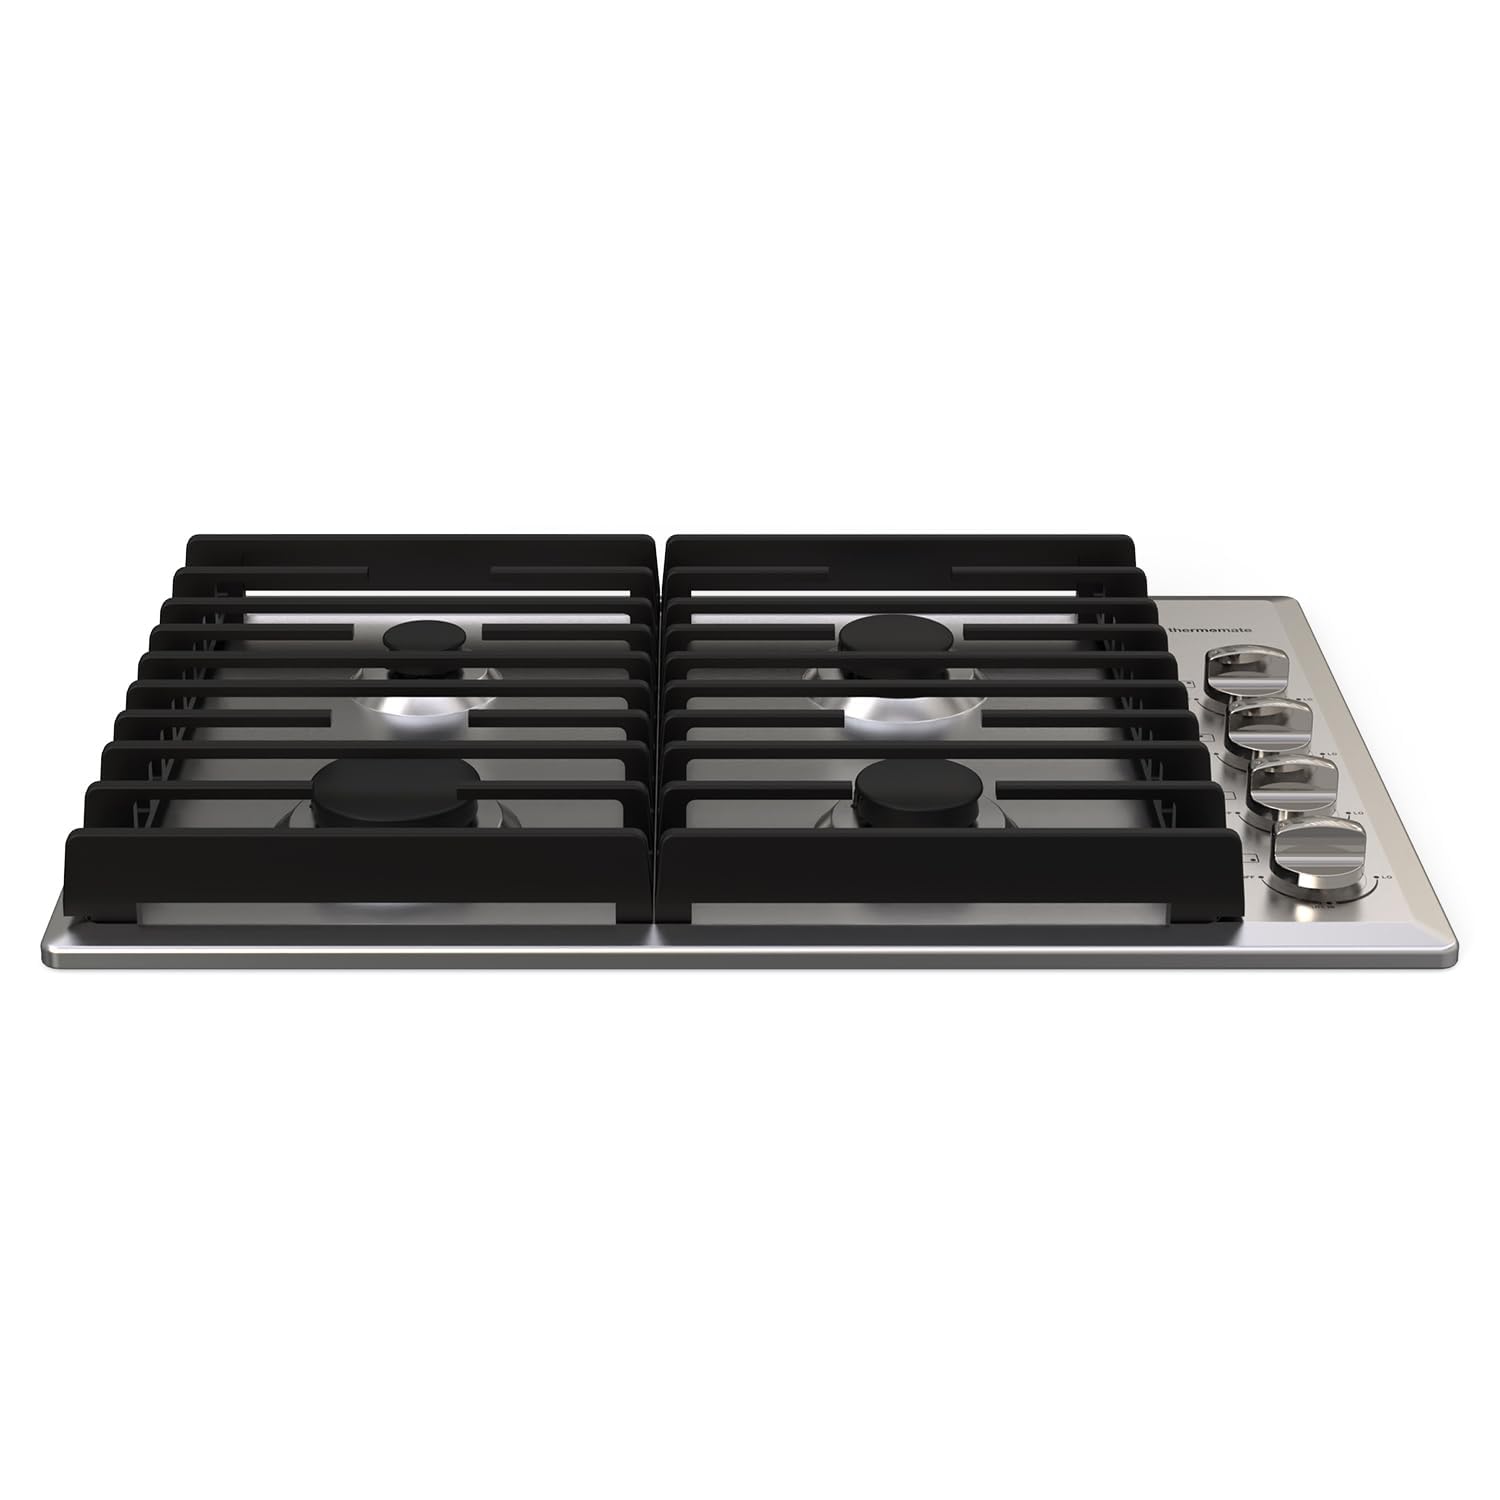 Thermomate 30 Inch Built-In Gas Cooktop w/ 4 SABAF Burners